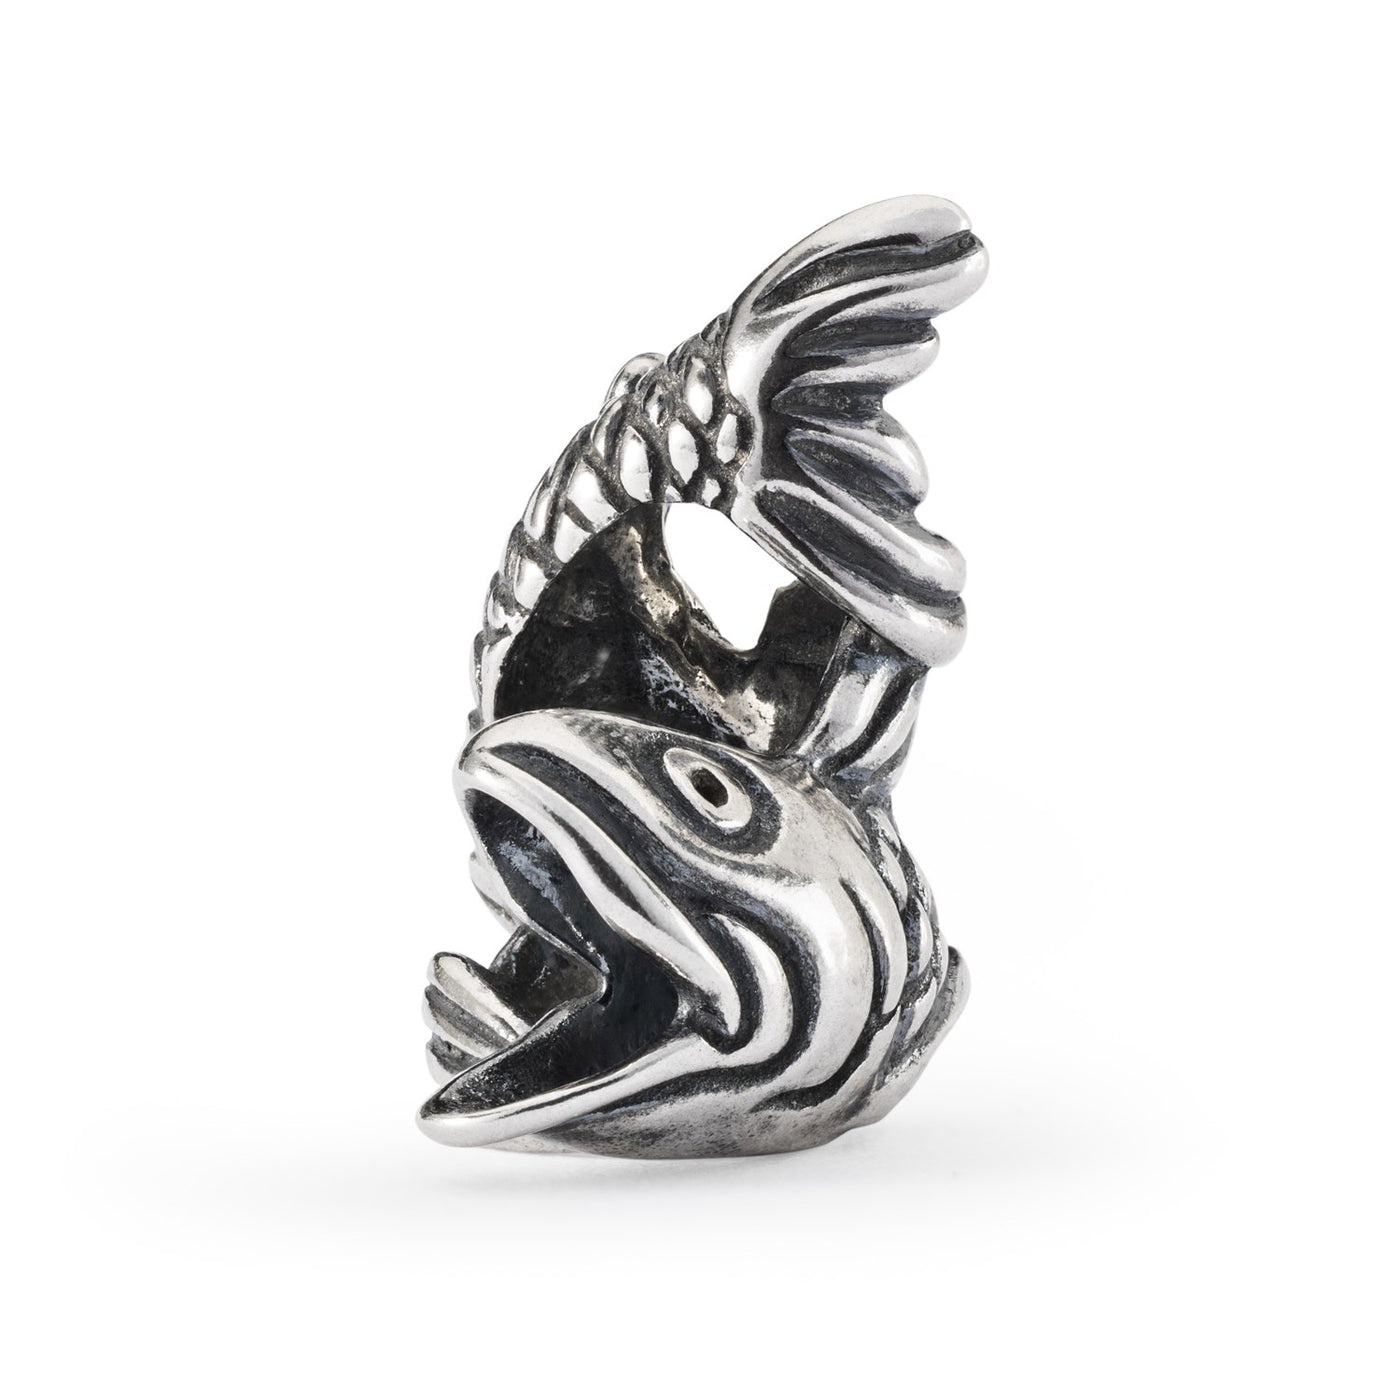 An intricately designed silver pendant featuring a twisted carp koi.